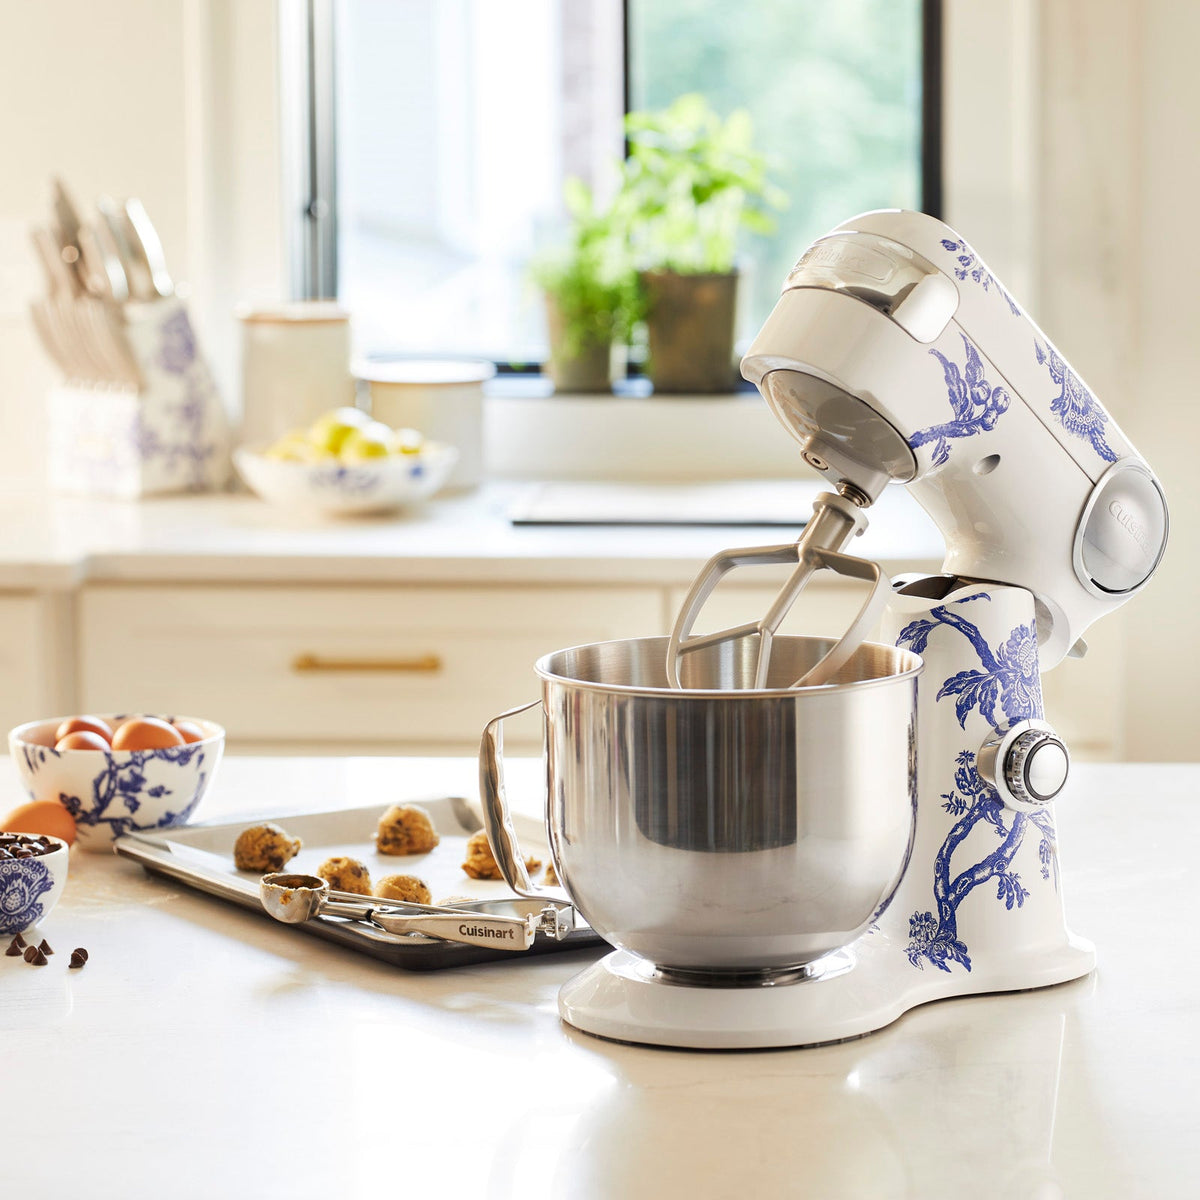 A Caskata X Cuisinart Limited Edition Arcadia Performance Stand Mixer on a kitchen counter.